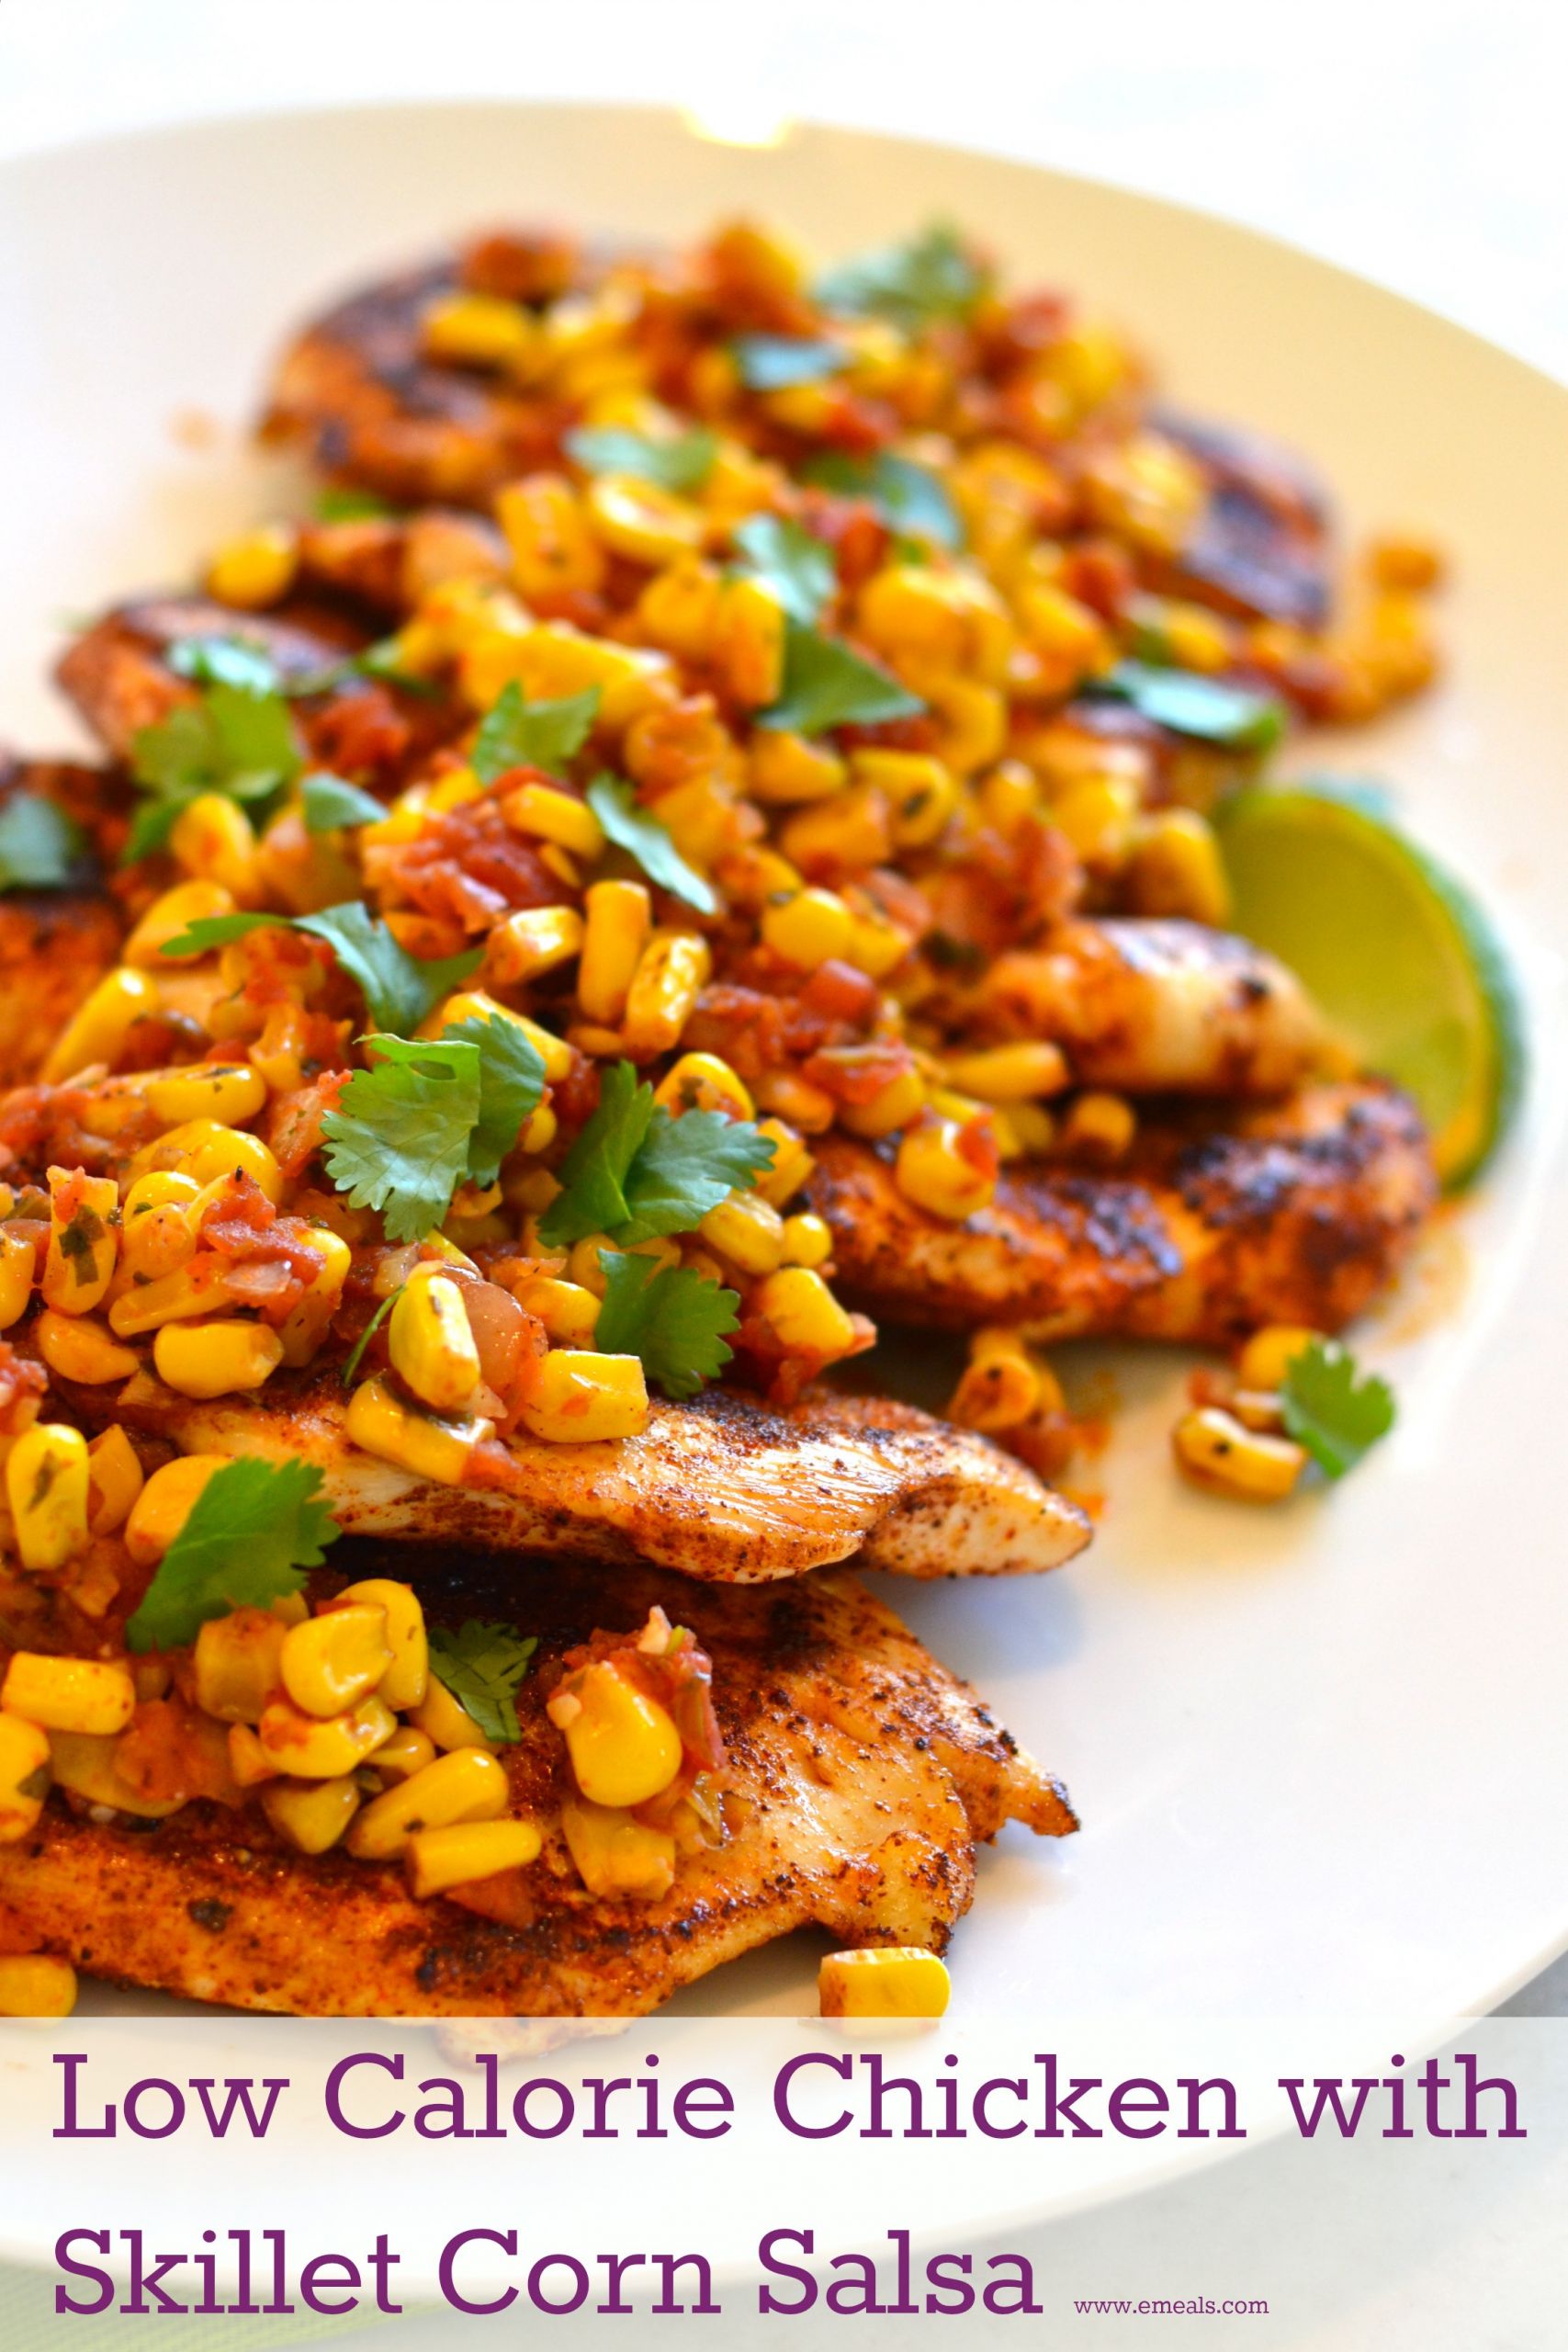 Low Calorie Boneless Chicken Recipes
 Low Calorie Dinner Recipe Spicy Chicken with Skillet Corn